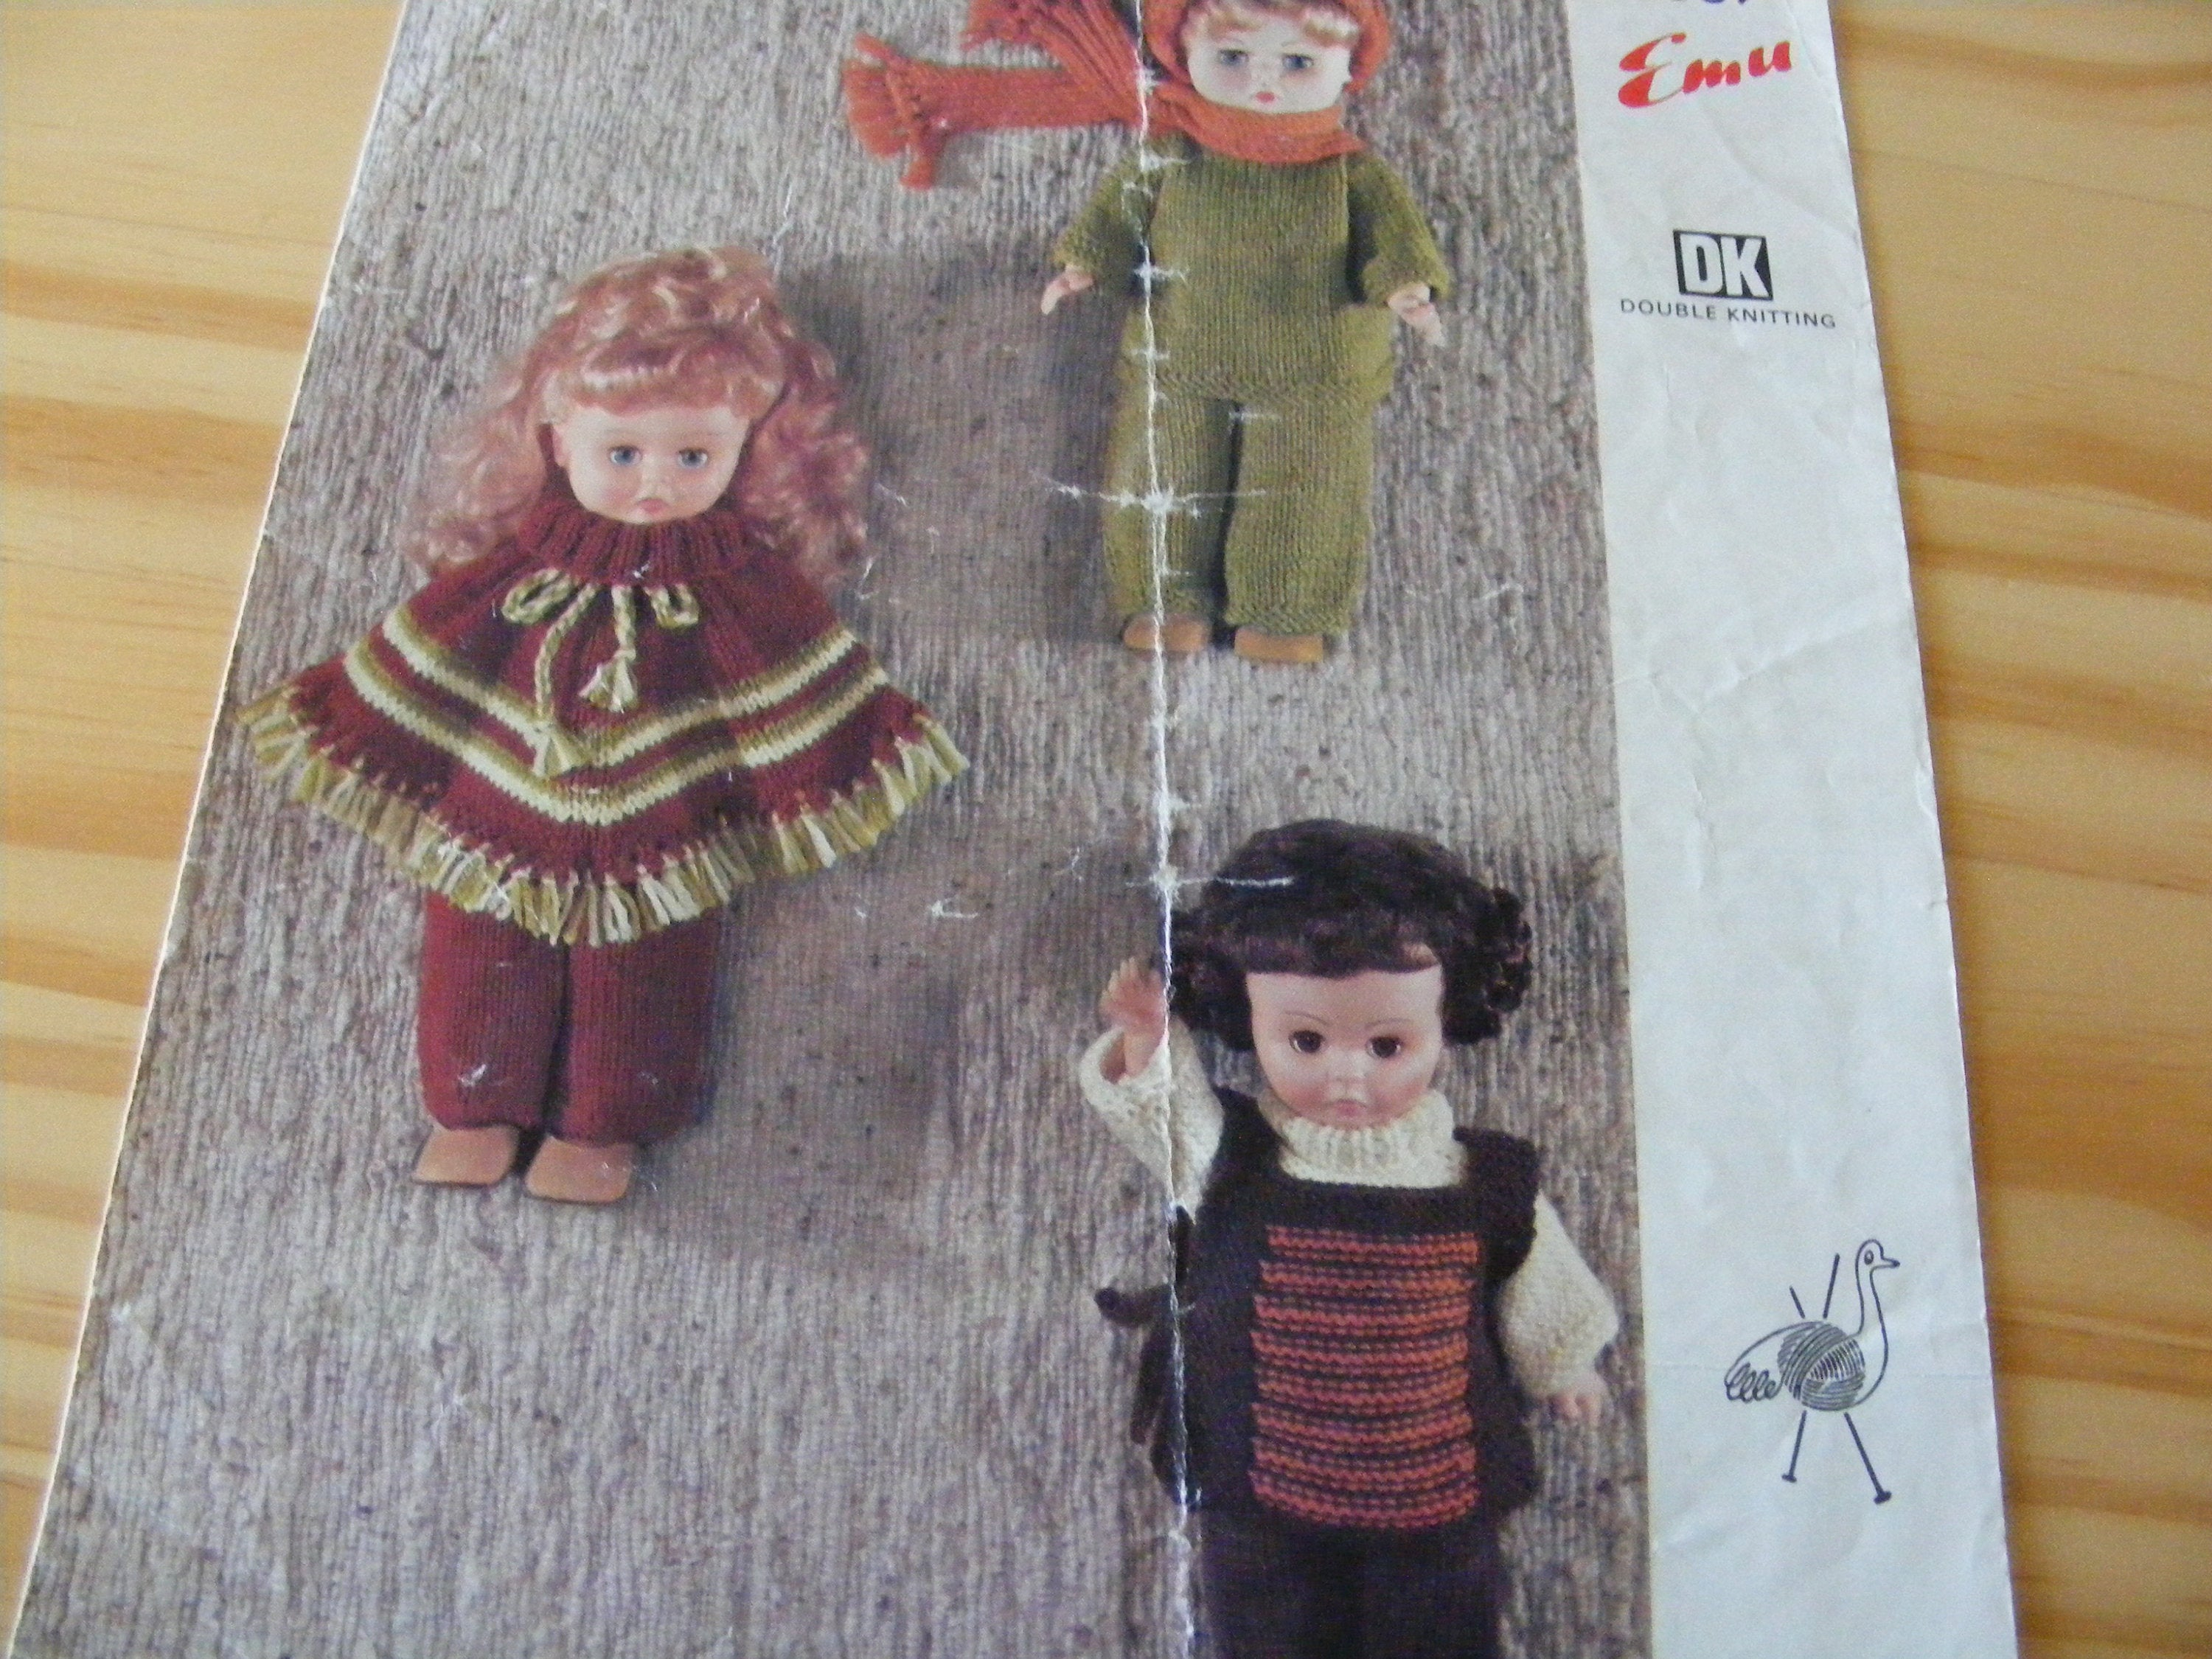 Free Knitting Patterns For 14 Inch Doll Clothes 60s70s Dolls Clothes Vintage Original Emu 6689 Paper Knitting Pattern 14 Inch Dolls Sweaters Trousers Tabard Hat Scarf Poncho In Dk